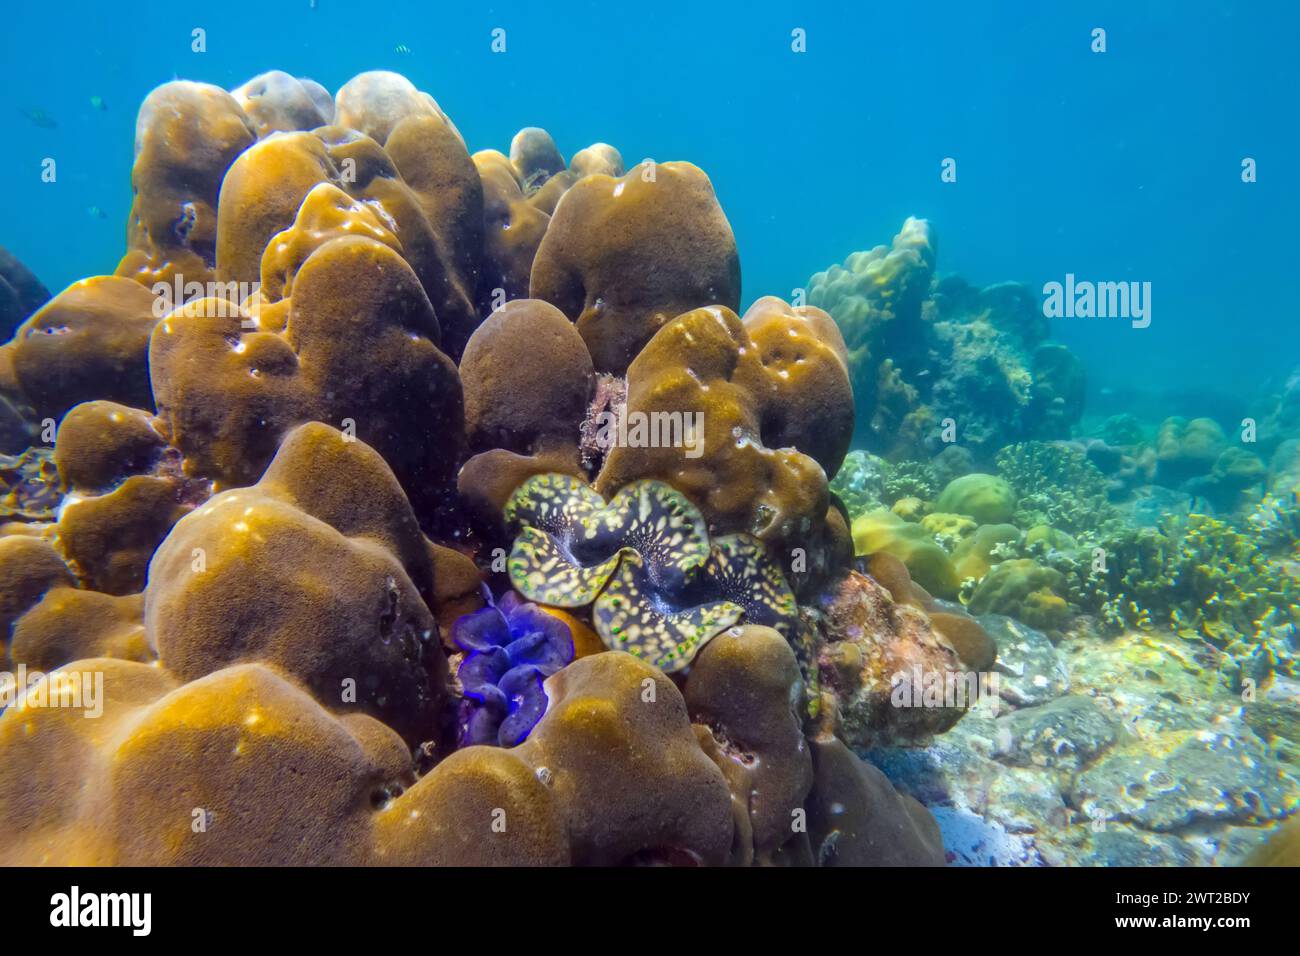 Many blue brown colorful tridacna clams with beautiful petal patterns and sea urchins on the coral reef underwater tropical exotic world Stock Photo